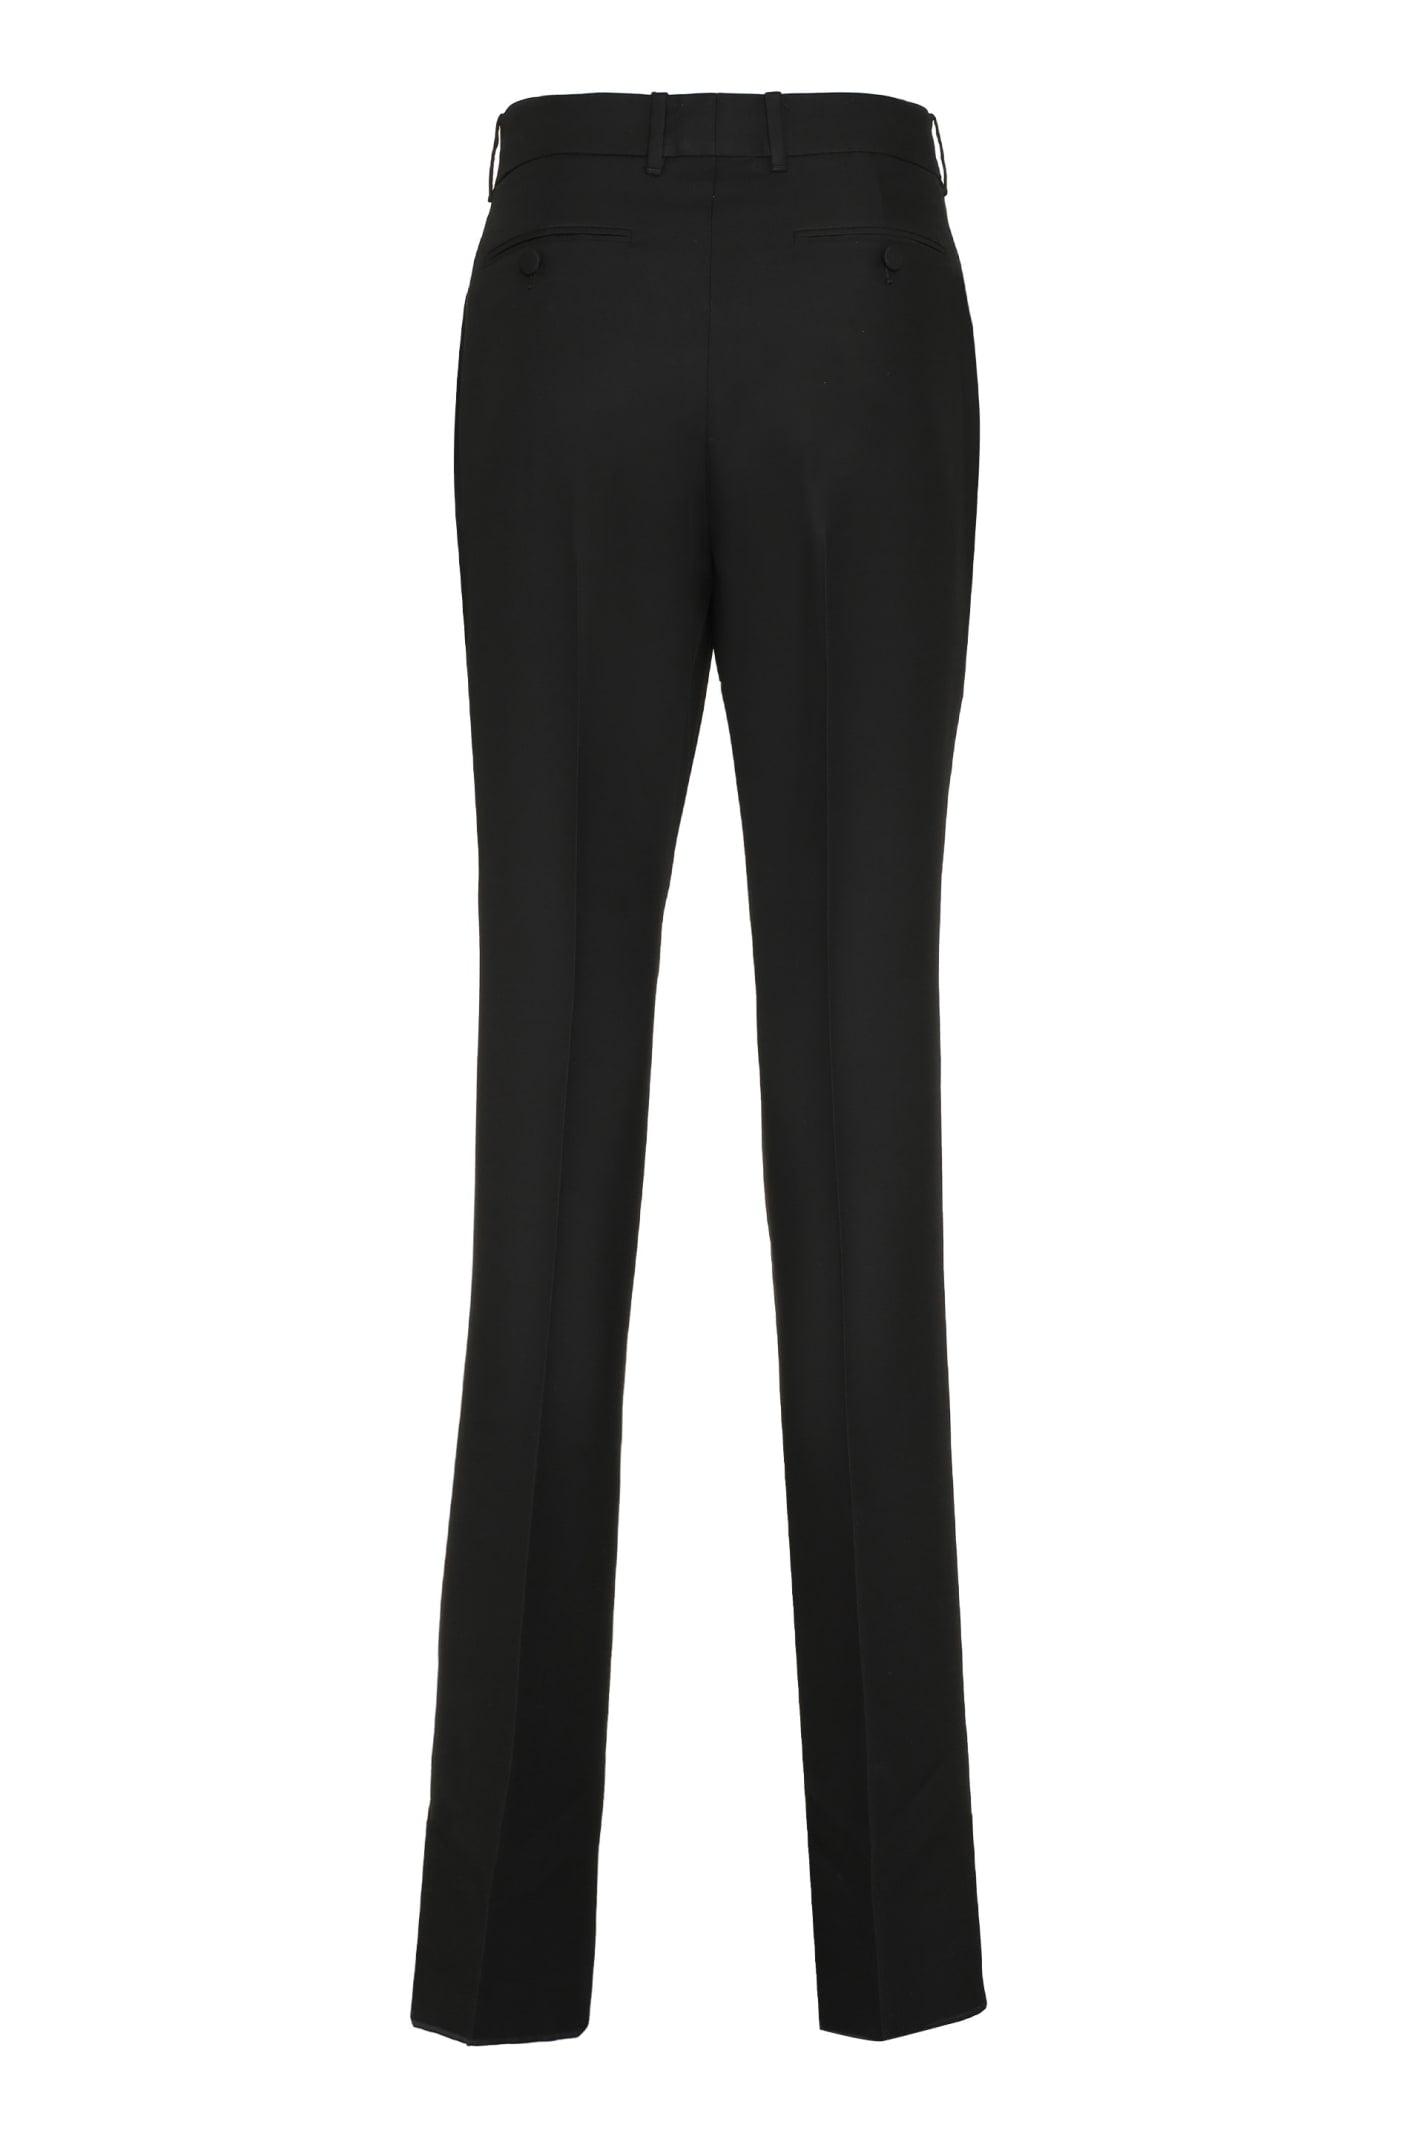 Gucci GG-canvas Tailored Relaxed Trousers - Black